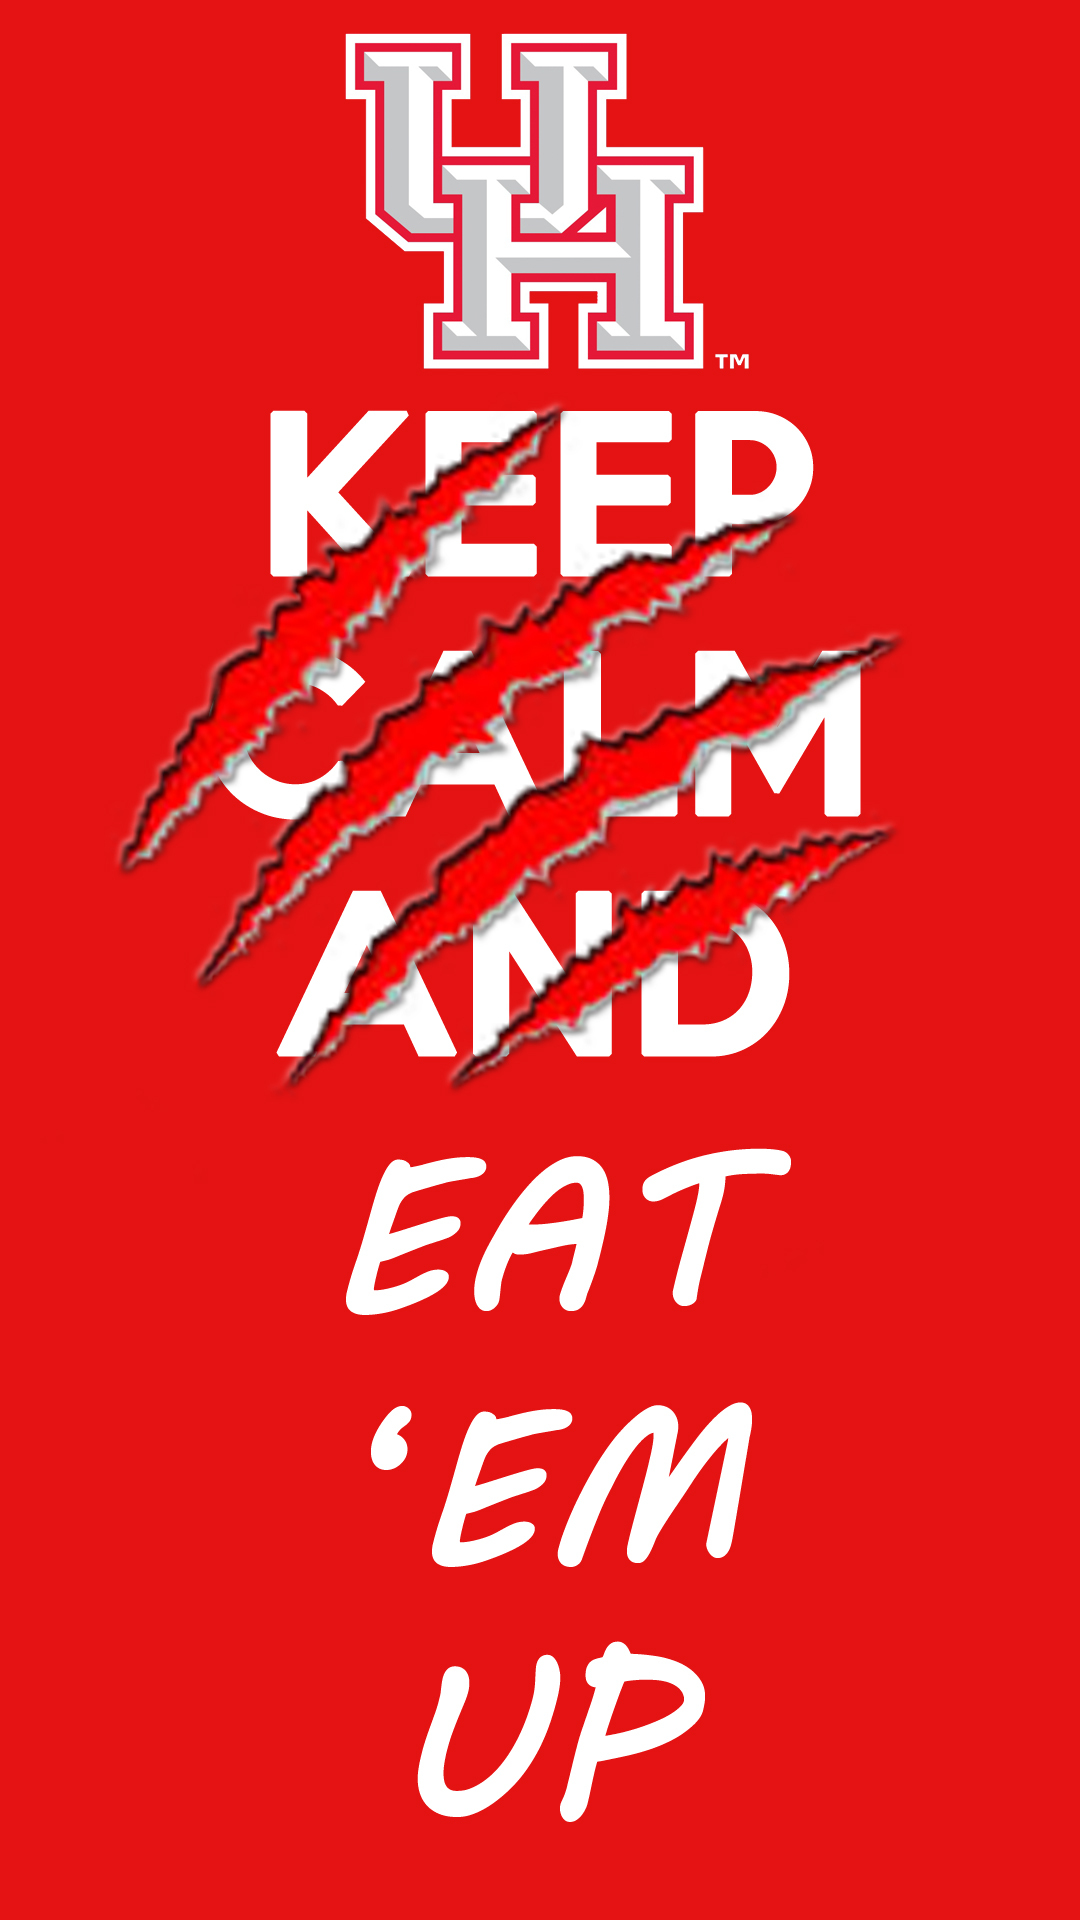 Jpeg1080×1920 384 Kb - Keep Calm And Carry , HD Wallpaper & Backgrounds